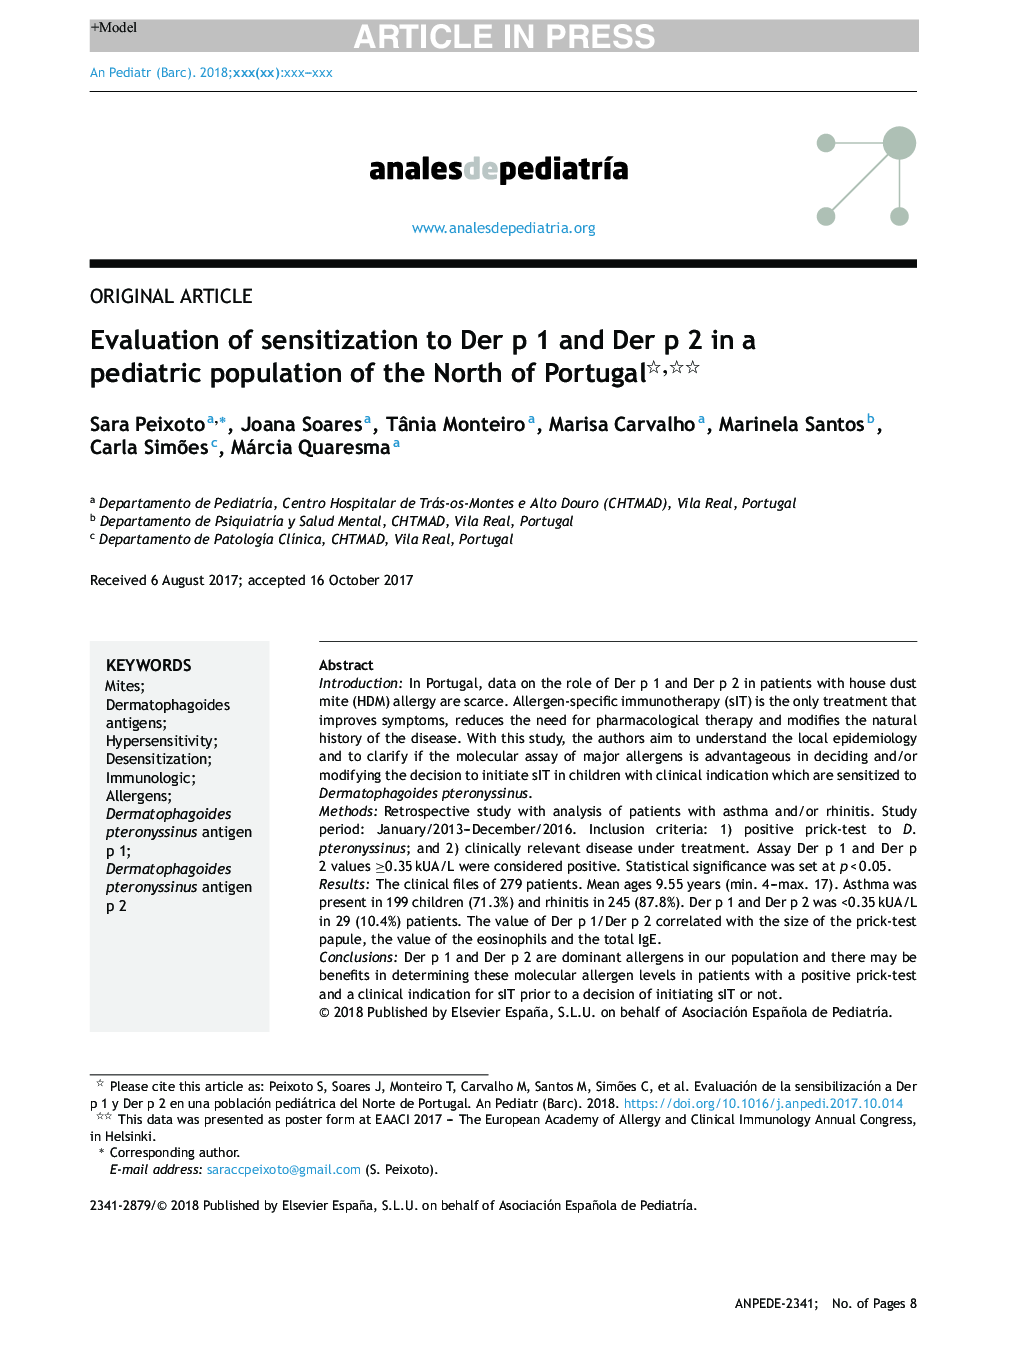 Evaluation of sensitization to Der p 1 and Der p 2 in a pediatric population of the North of Portugal